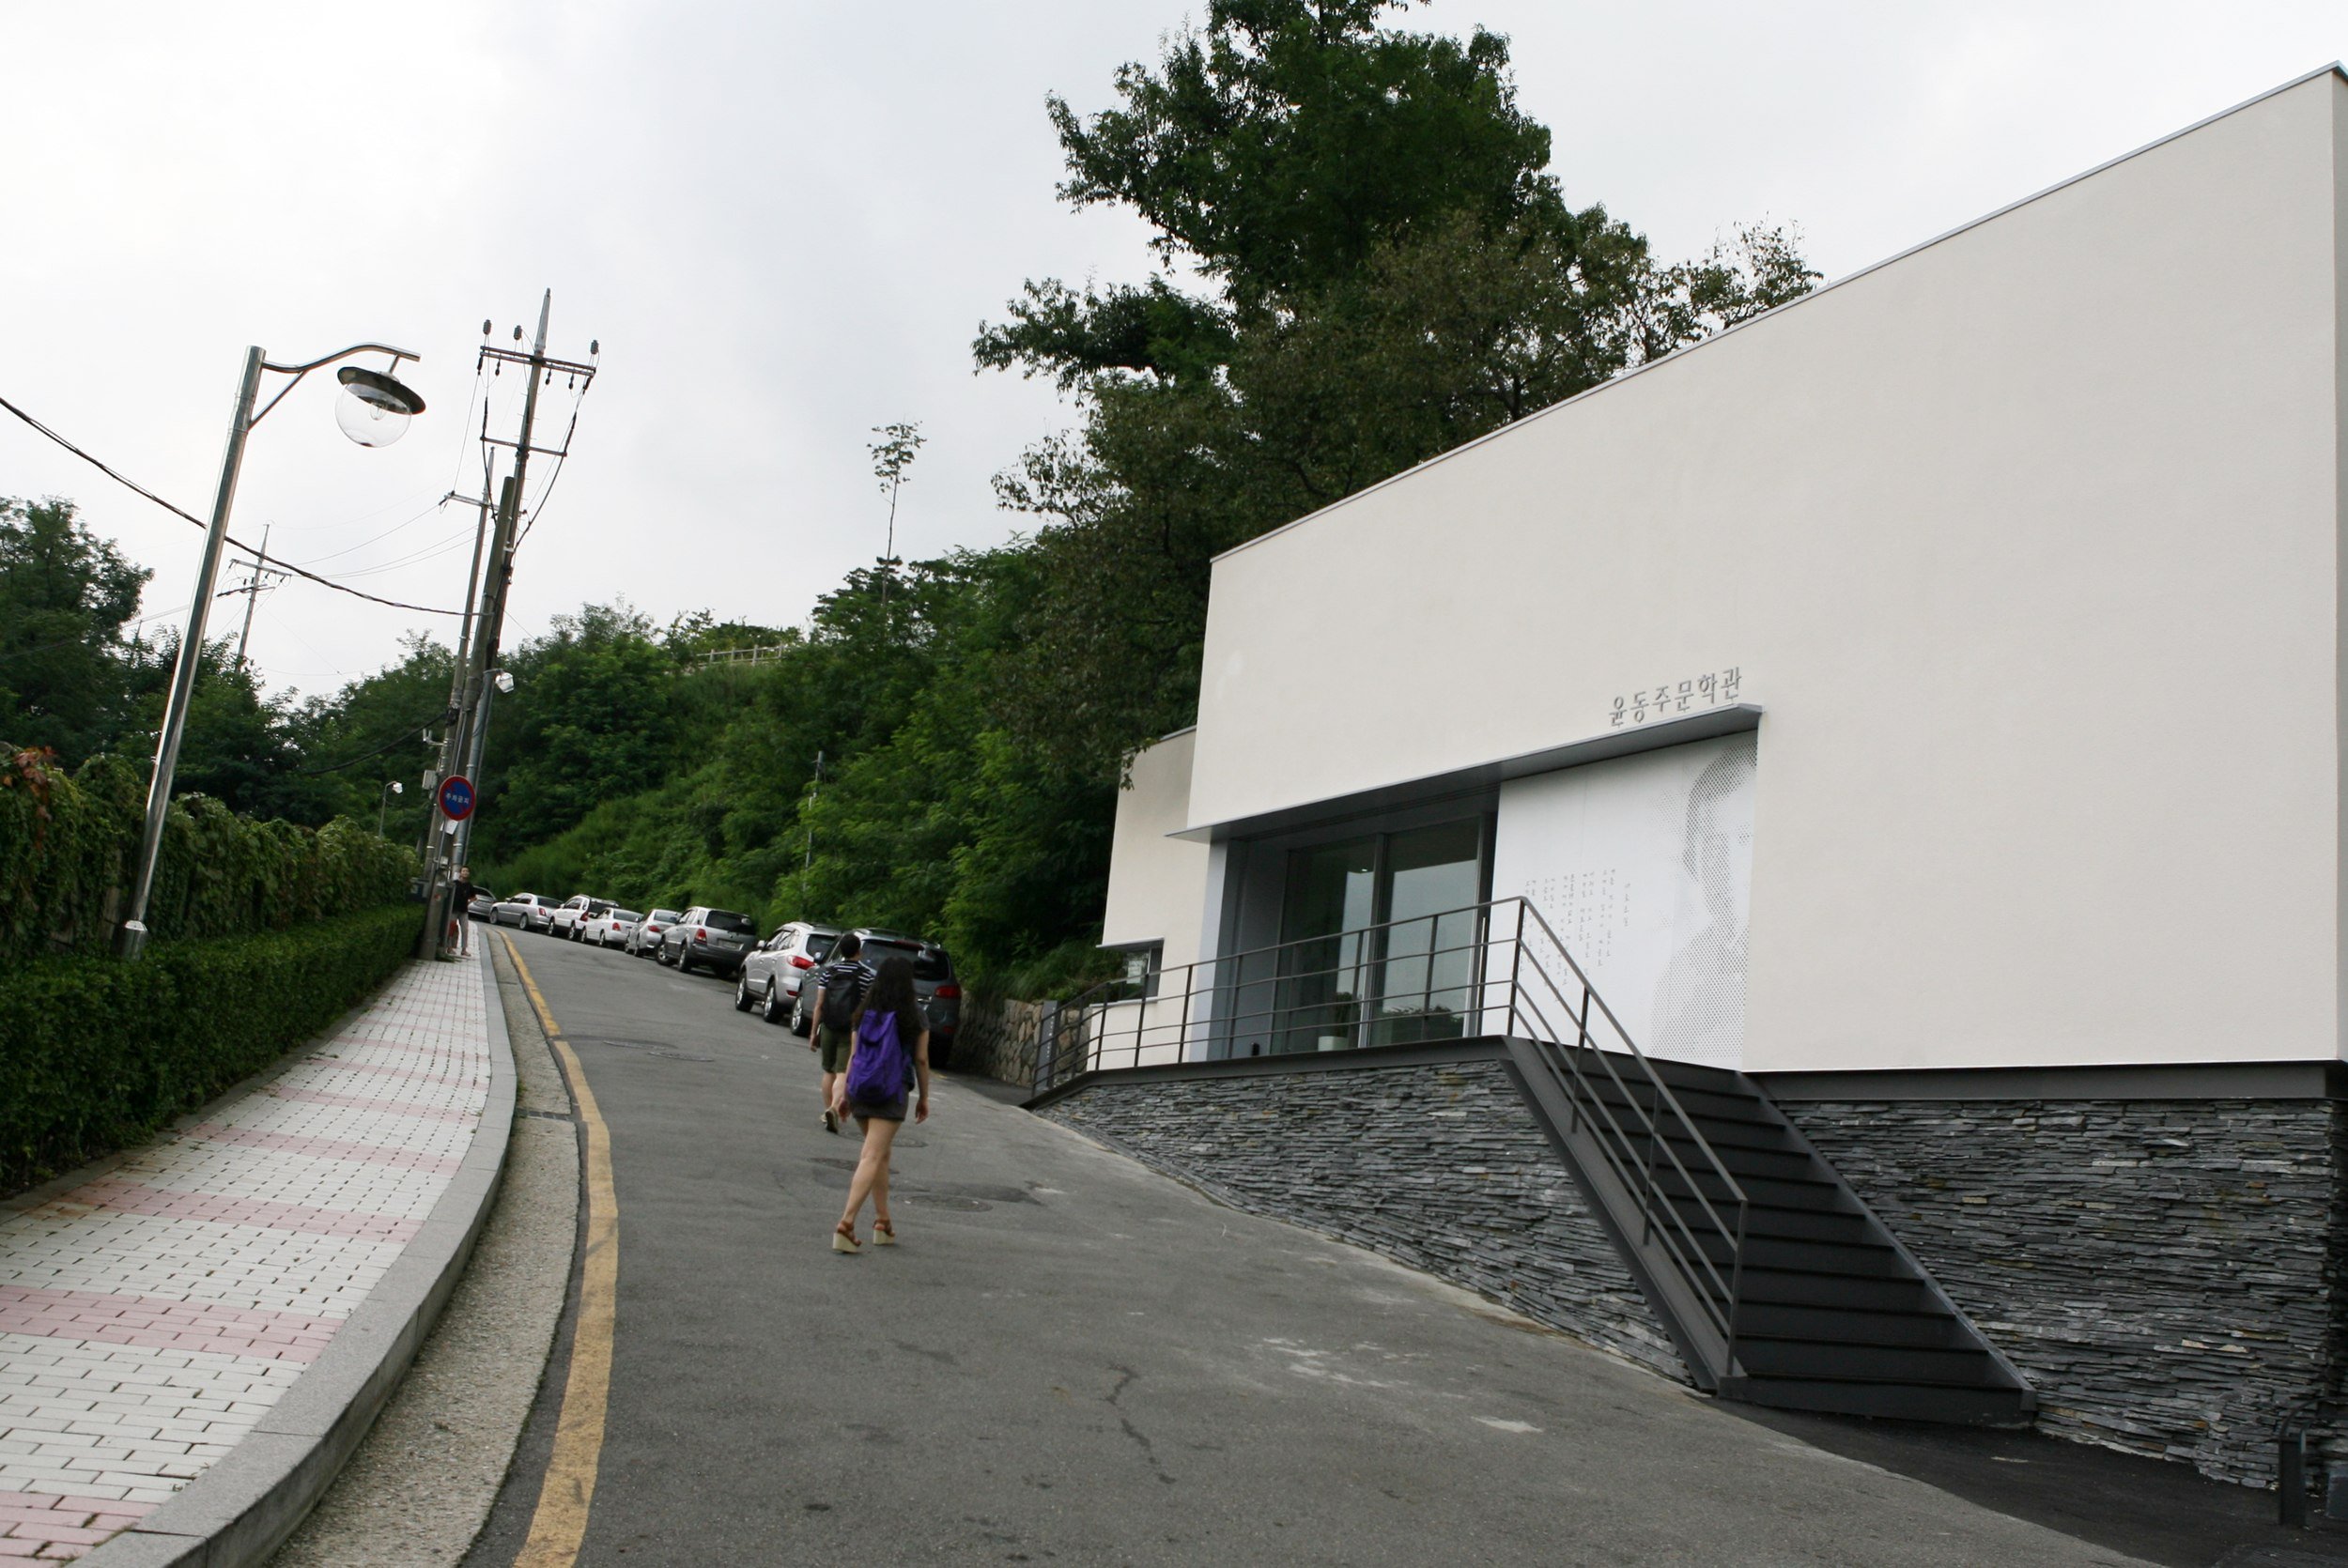 The Yun Dong-ju Literature Museum - a quiet place to go in Seoul